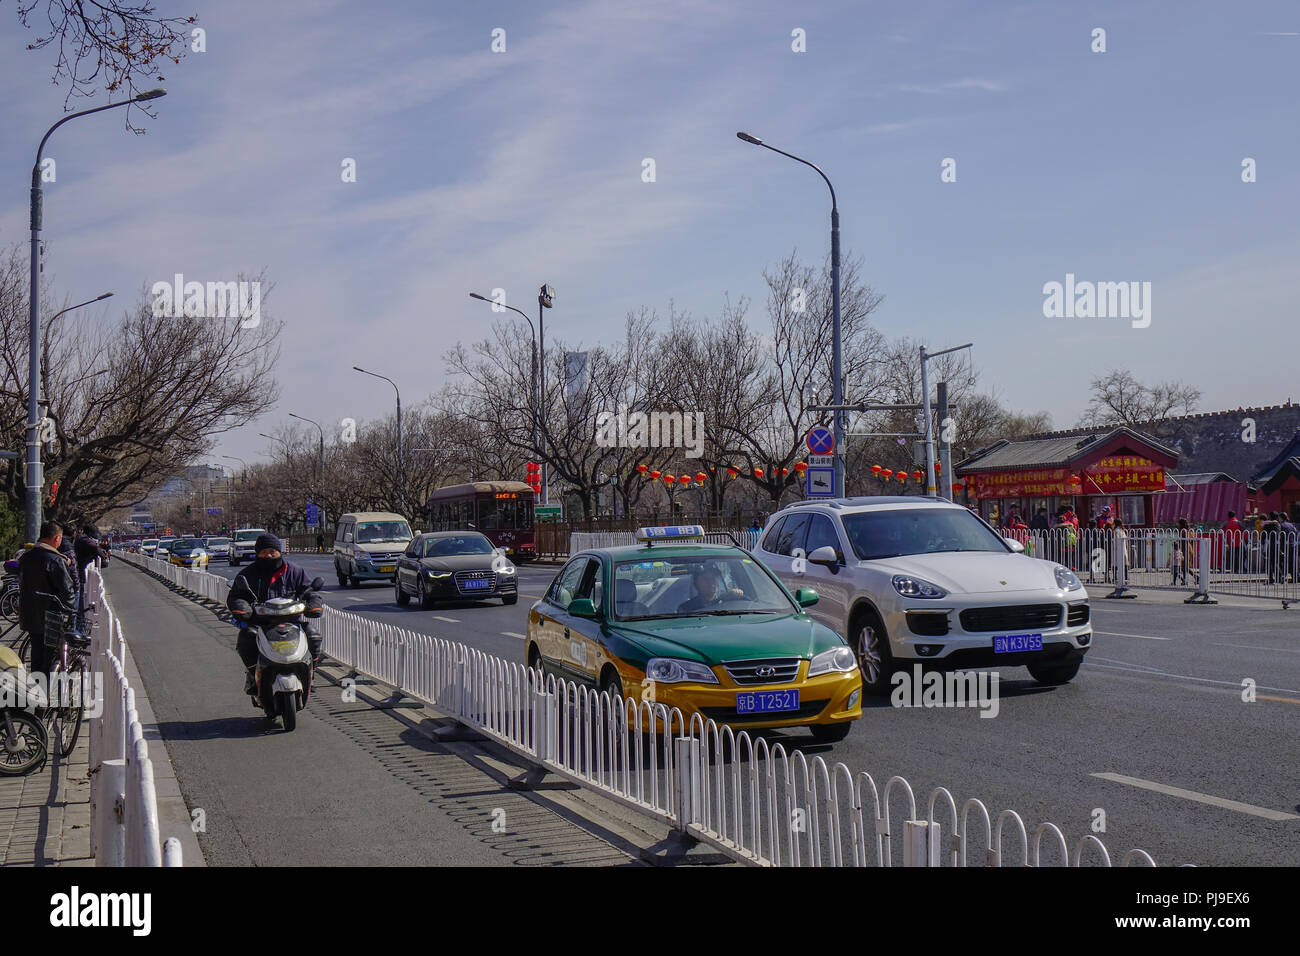 Beijing, China - Mar 1, 2018. Street in Beijing, China. Beijing is a major hub for the national highway, expressway, railway, and high-speed rail netw Stock Photo